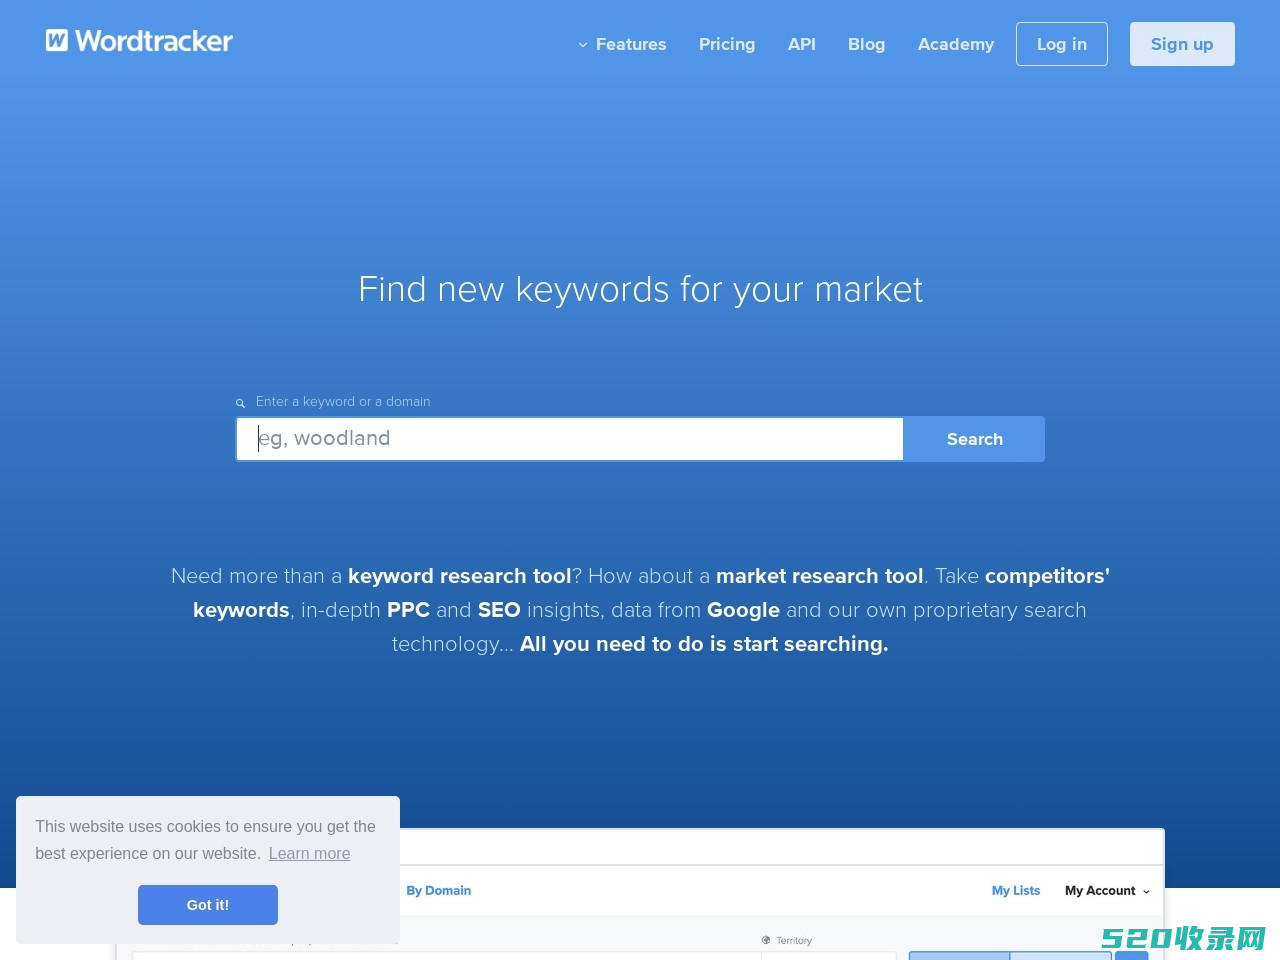 Free Keyword Research Tool from Wordtracker